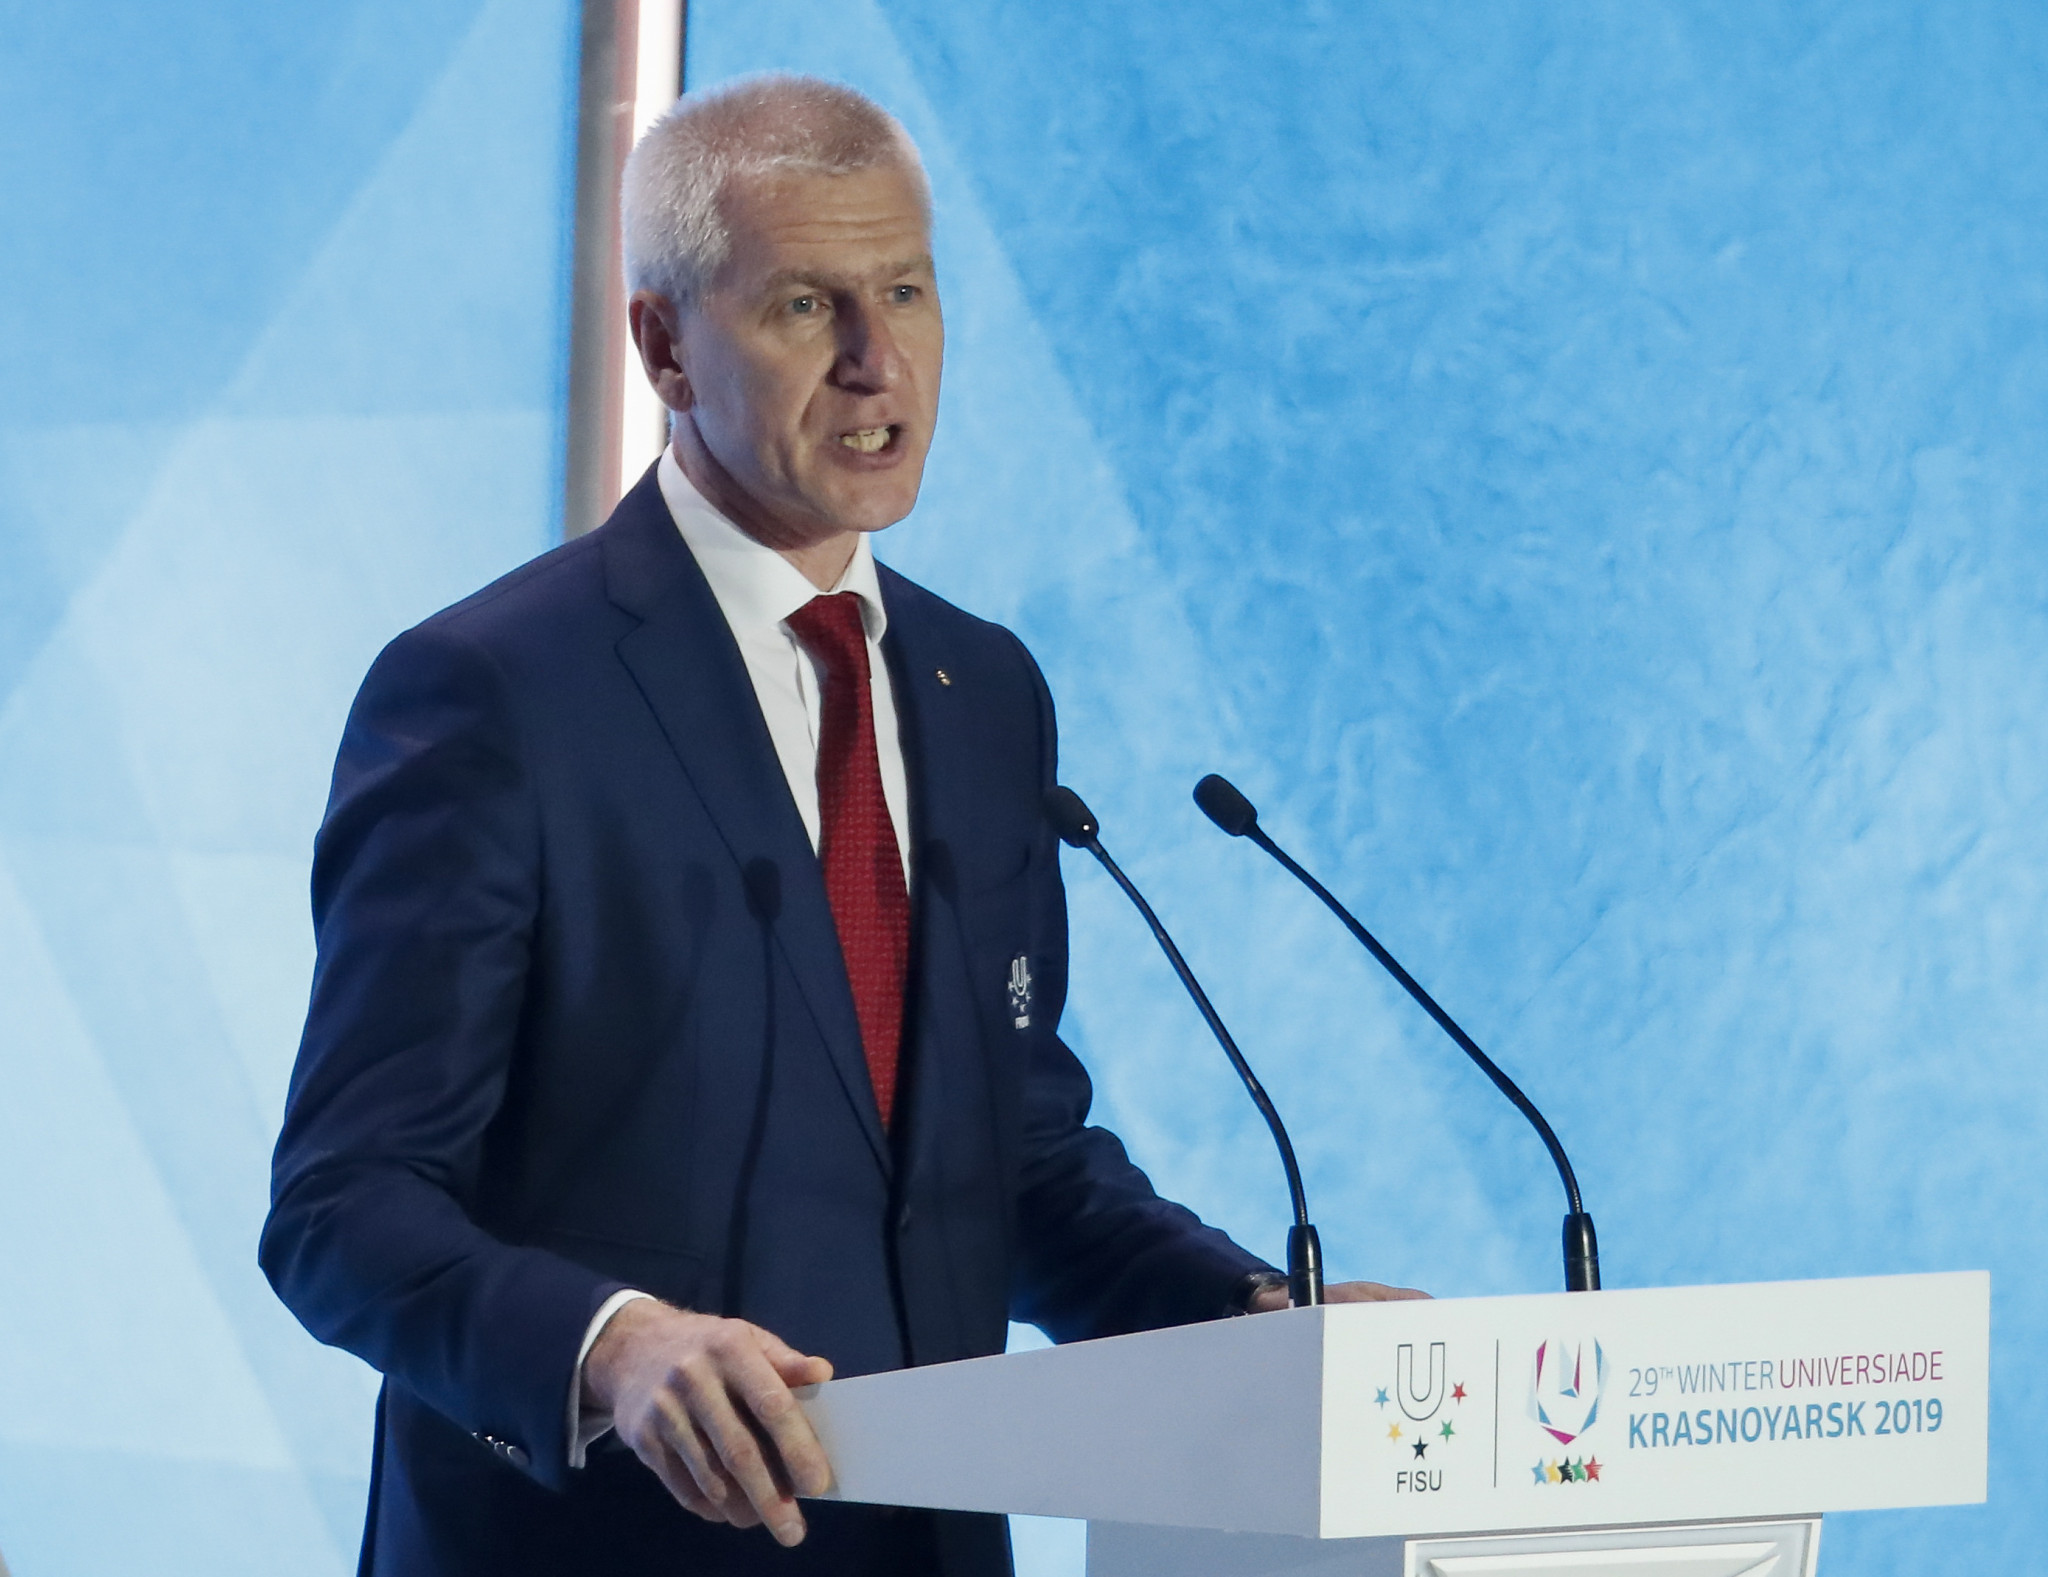 FISU President Oleg Matytsin confirmed interest from Pyeongchang in hosting a Winter Universiade ©Getty Images